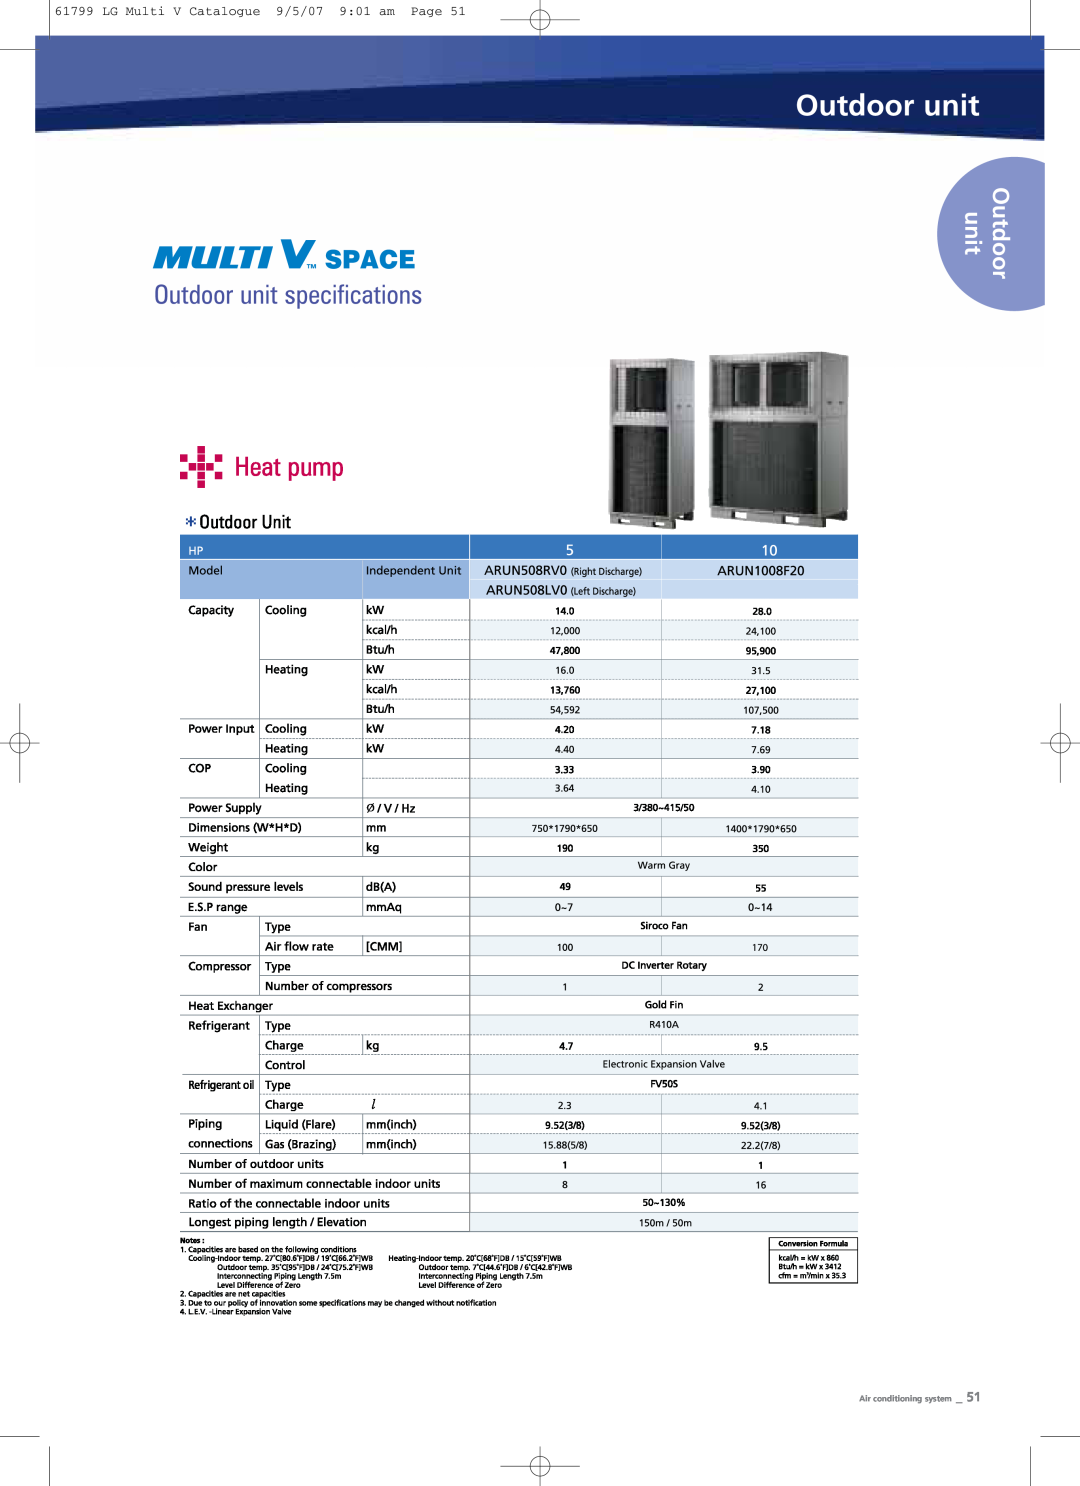 LG Electronics PRHR040 manual Outdoor unit specifications, Heat pump, LG Multi V Catalogue 9/5/07 901 am Page 